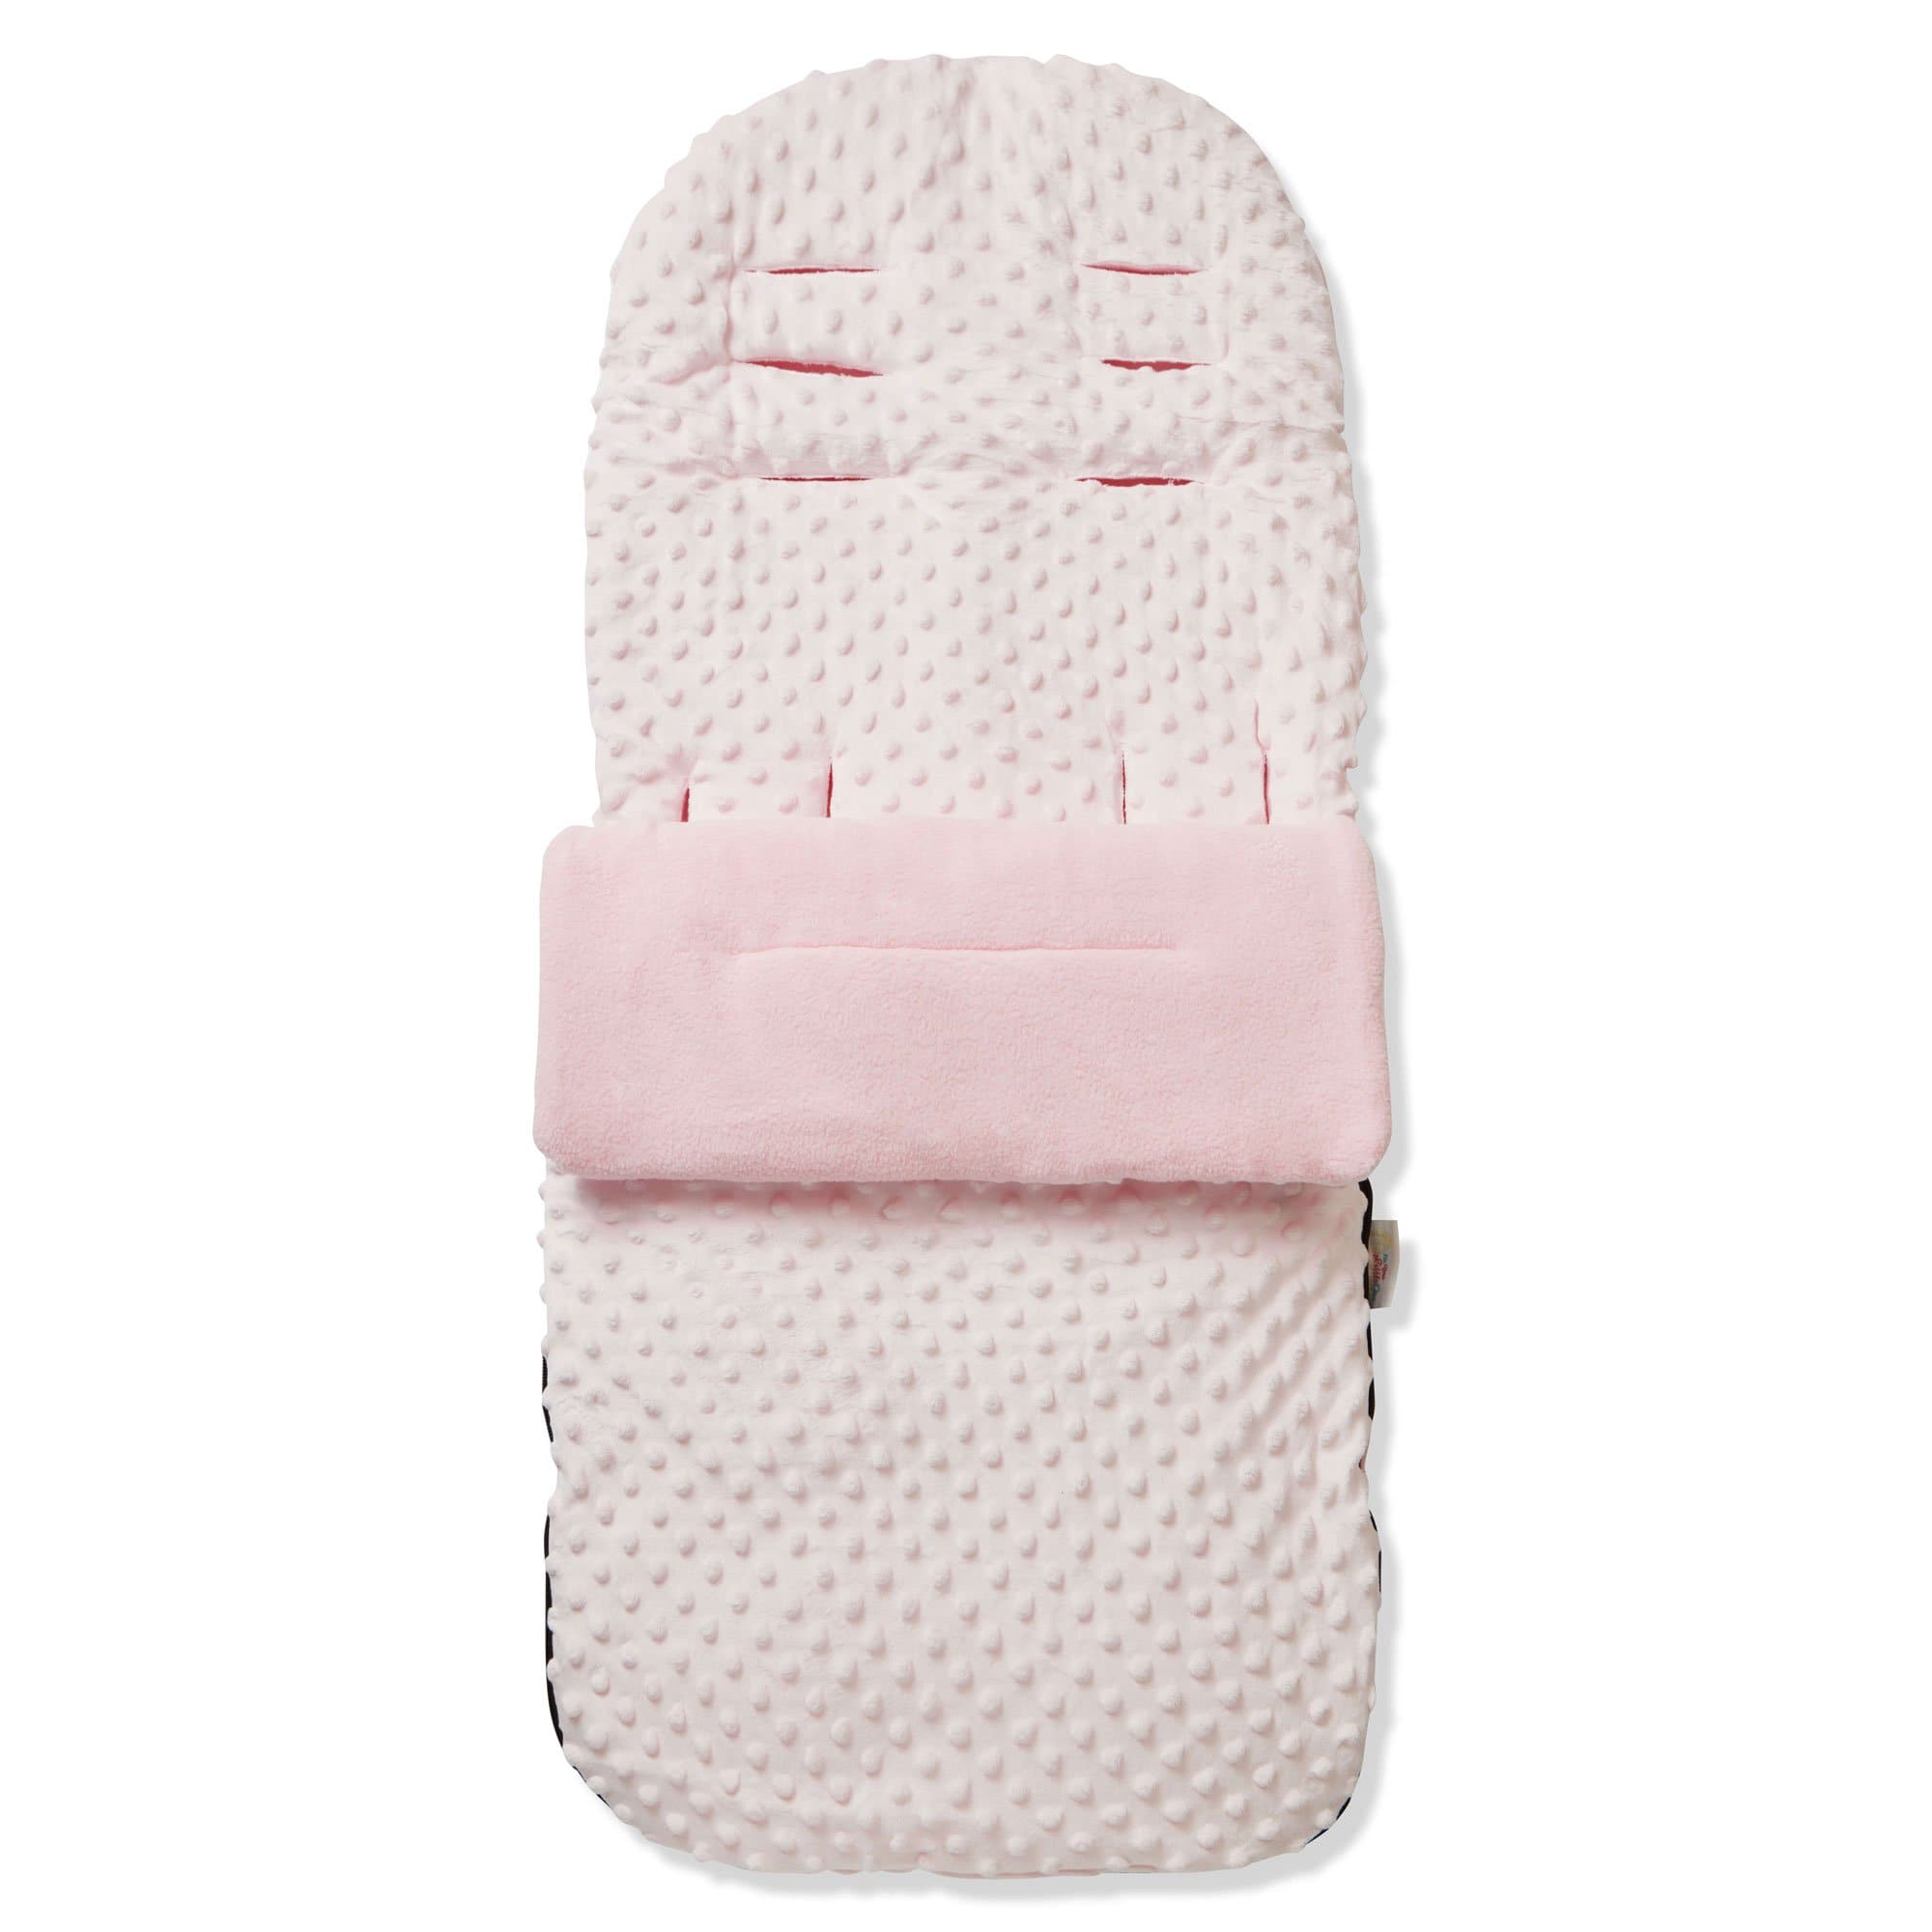 Dimple Footmuff / Cosy Toes Compatible with Norton - Pink / Fits All Models | For Your Little One